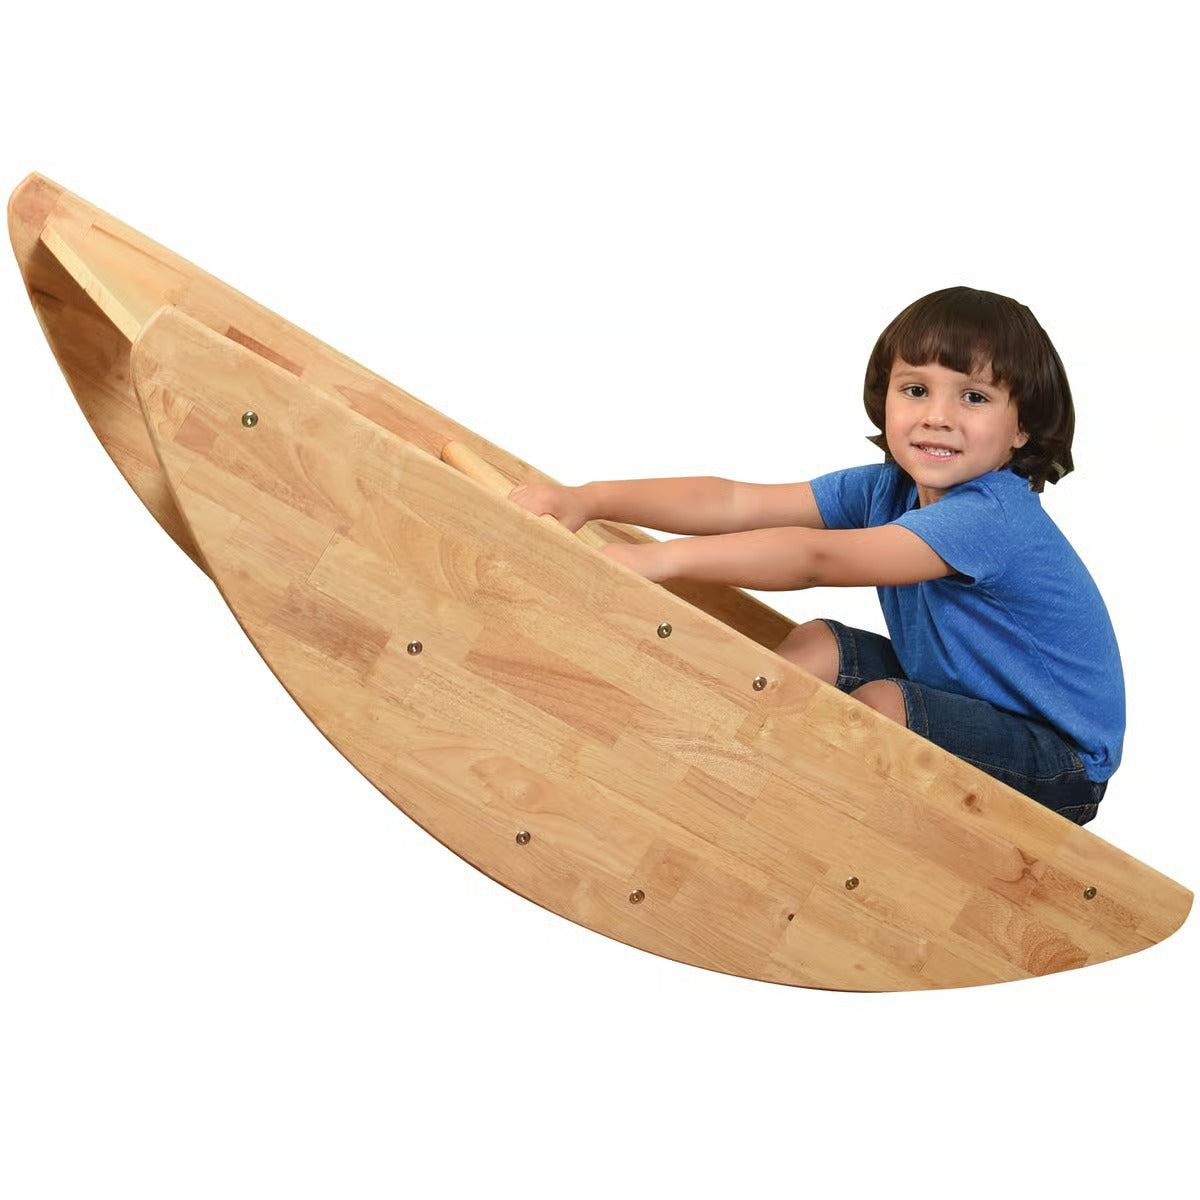 Wooden Rocking Boat Riding Toy in Motion